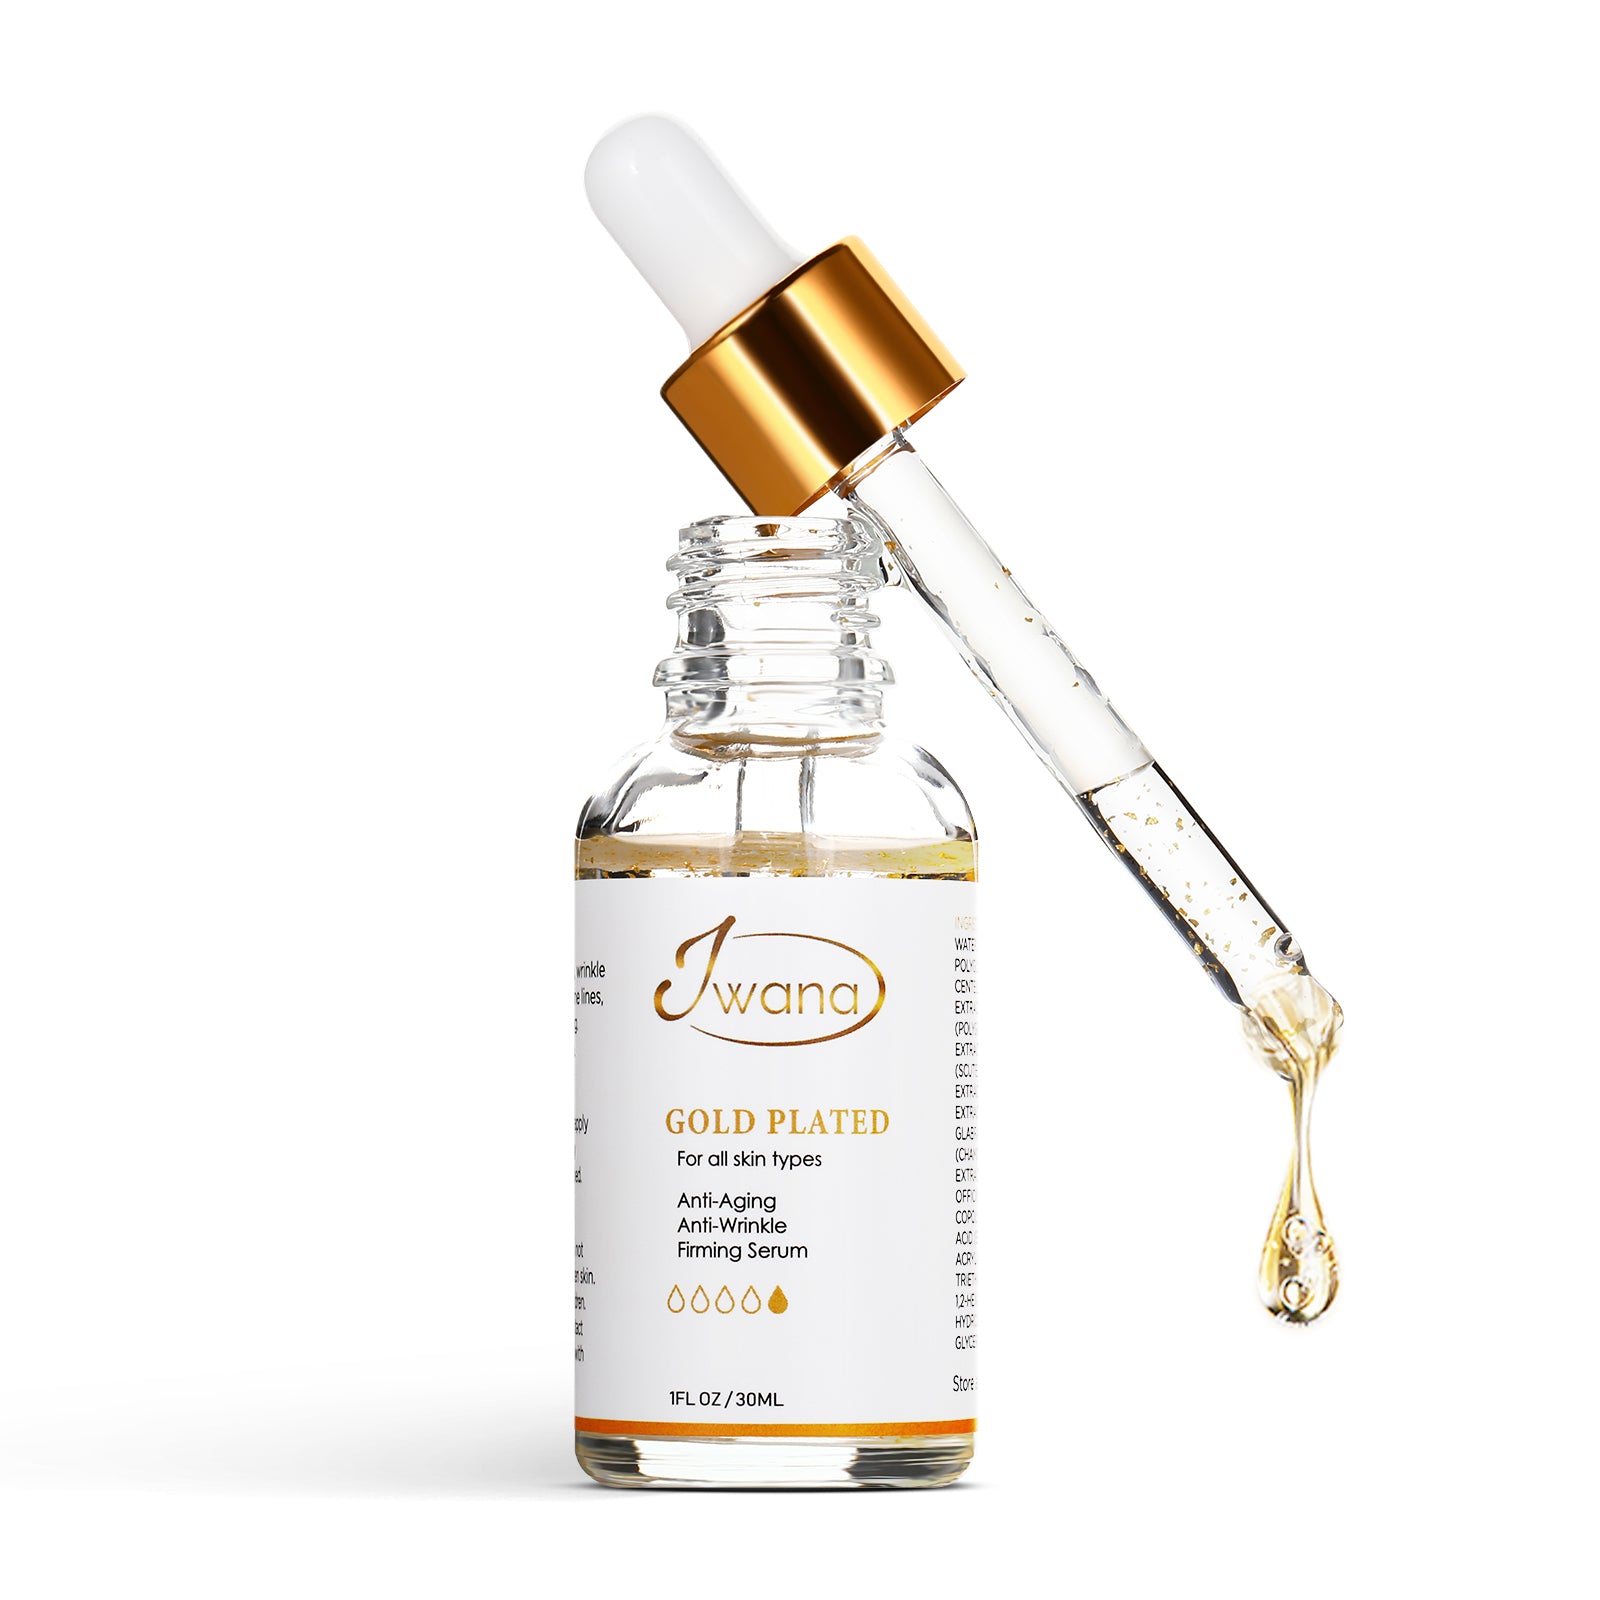 The Unbelievable Jaw-Dropping Anti-Aging, Firming Serum